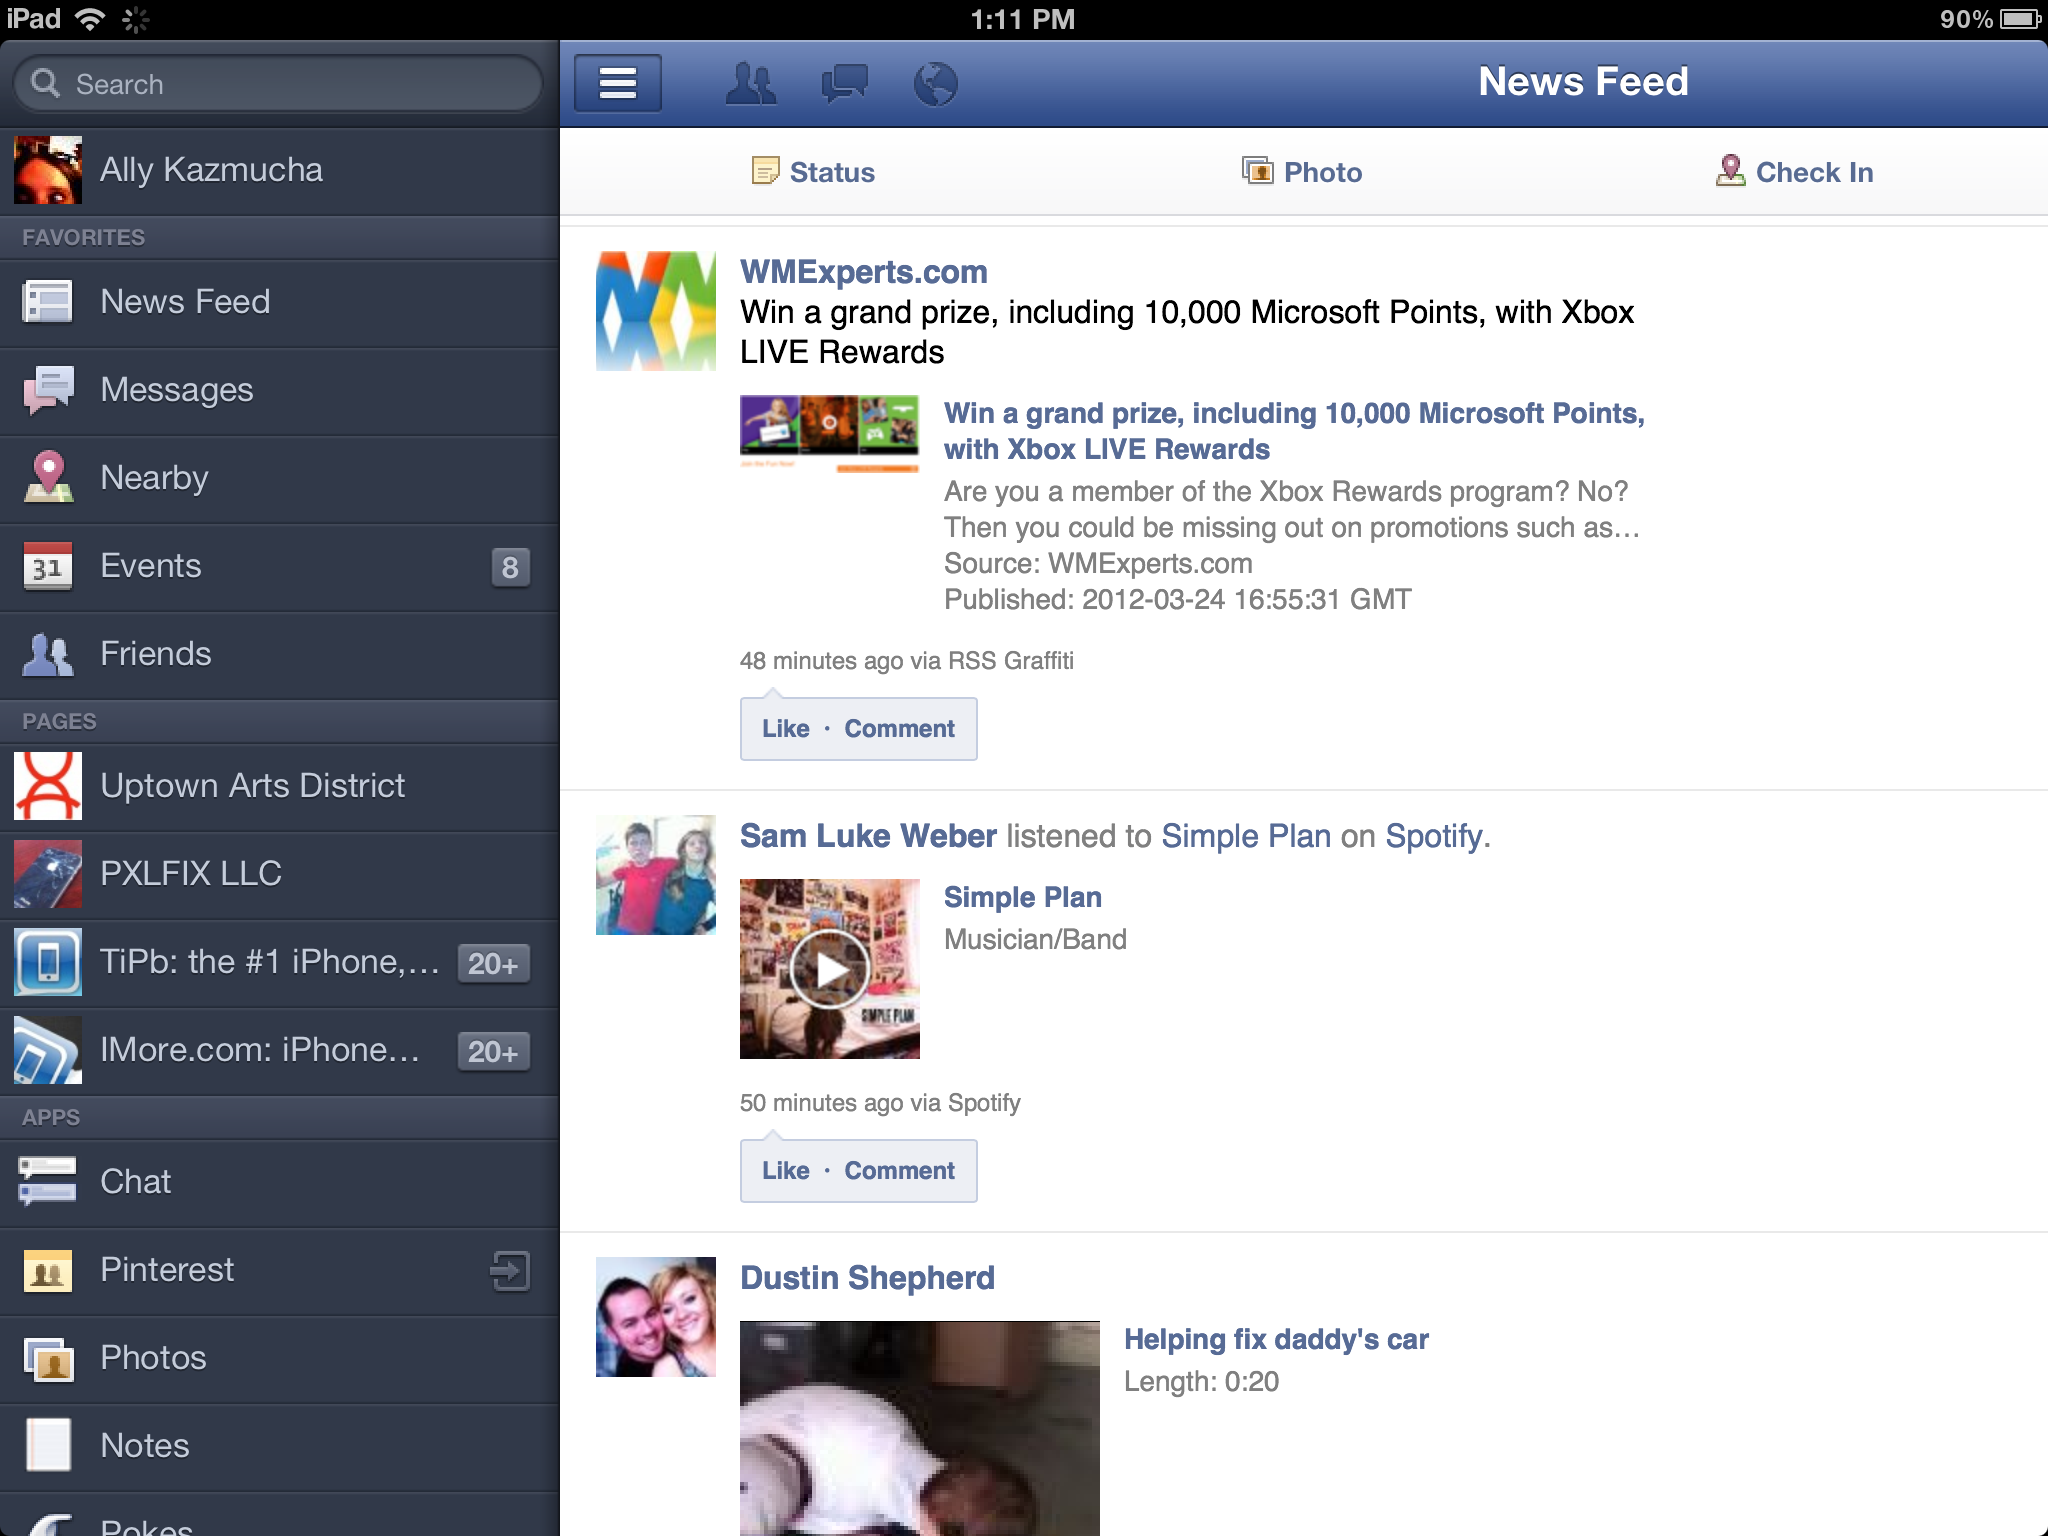 How to use the official Facebook app on your new iPad